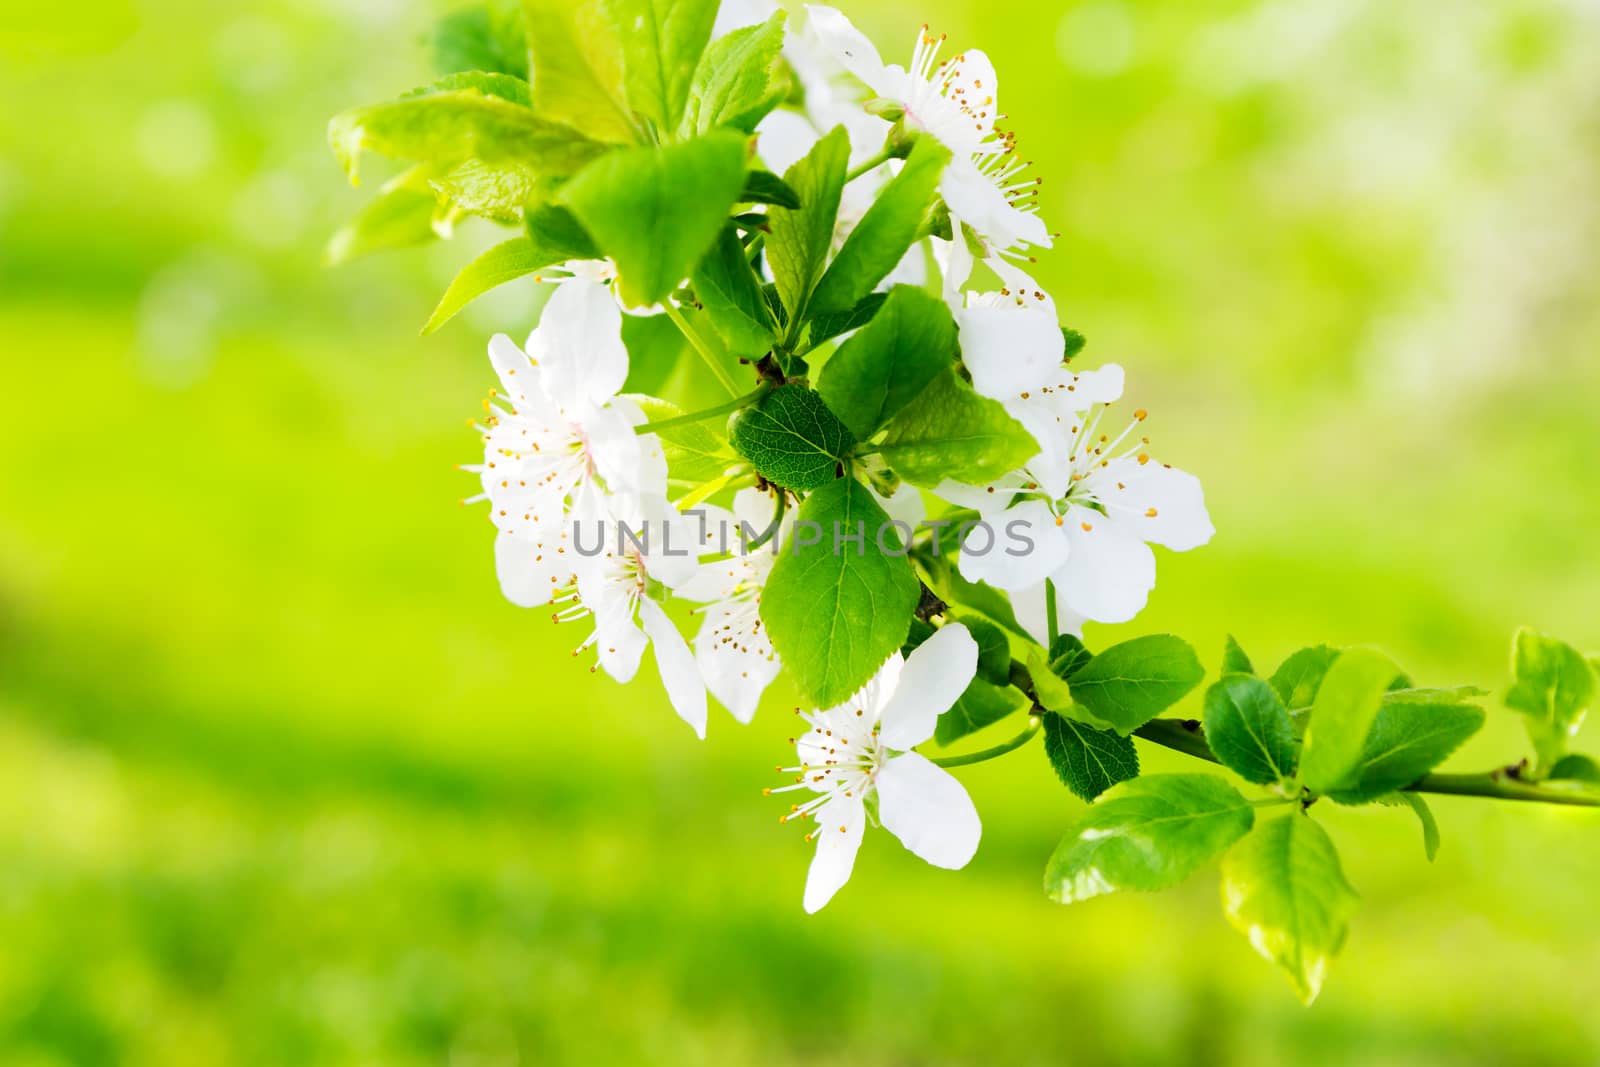 twig with flowers of apple tree on a blurred background of green grass